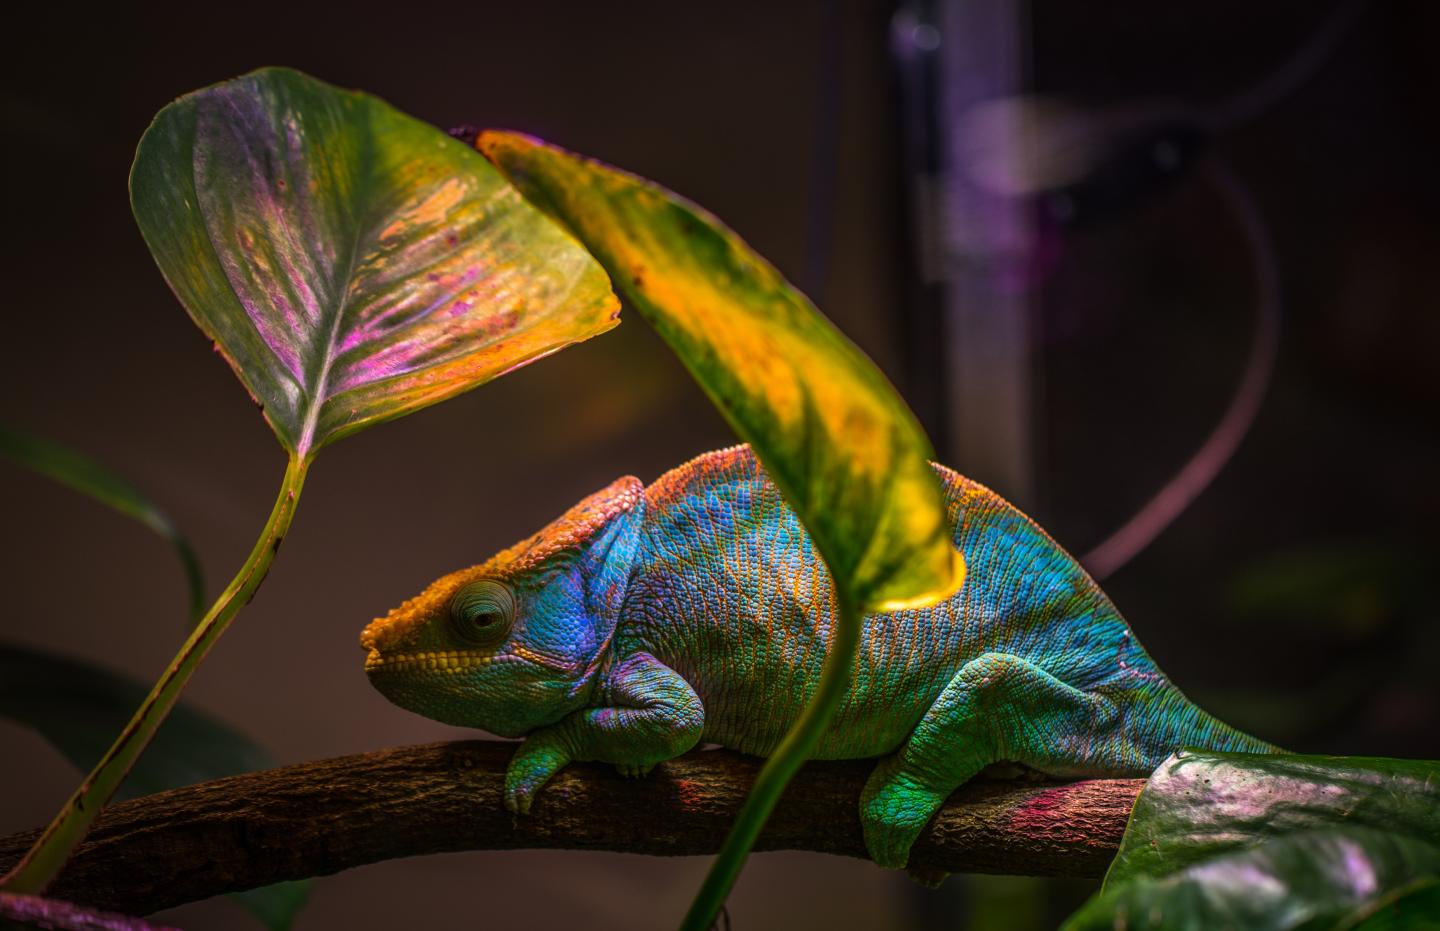 New bio-based smart skin is a flexible color-changing film inspired by chameleons